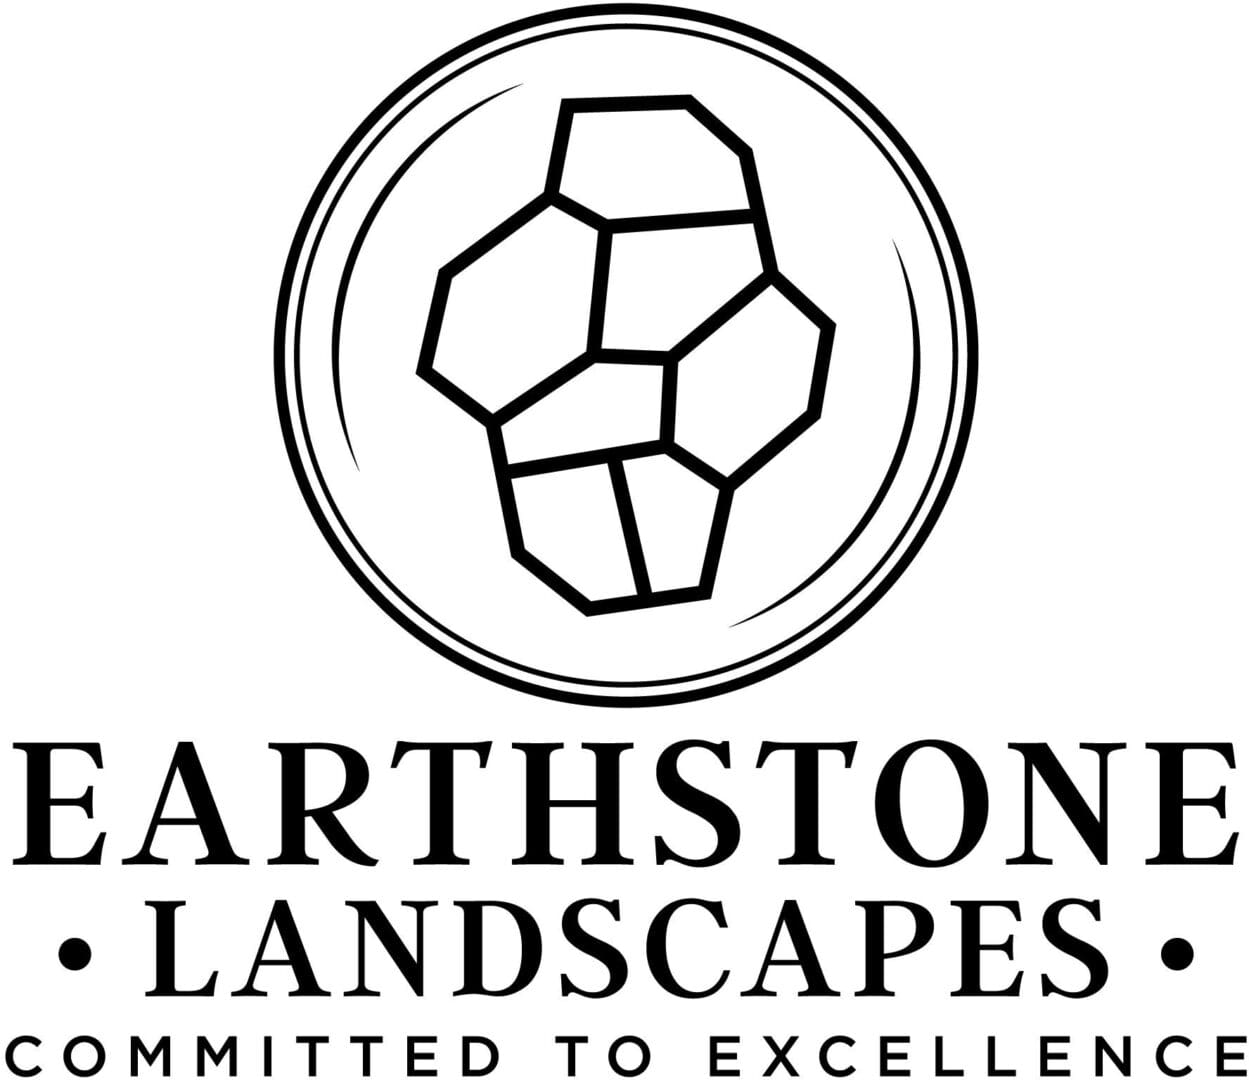 A black and white logo of earthstone landscapes.